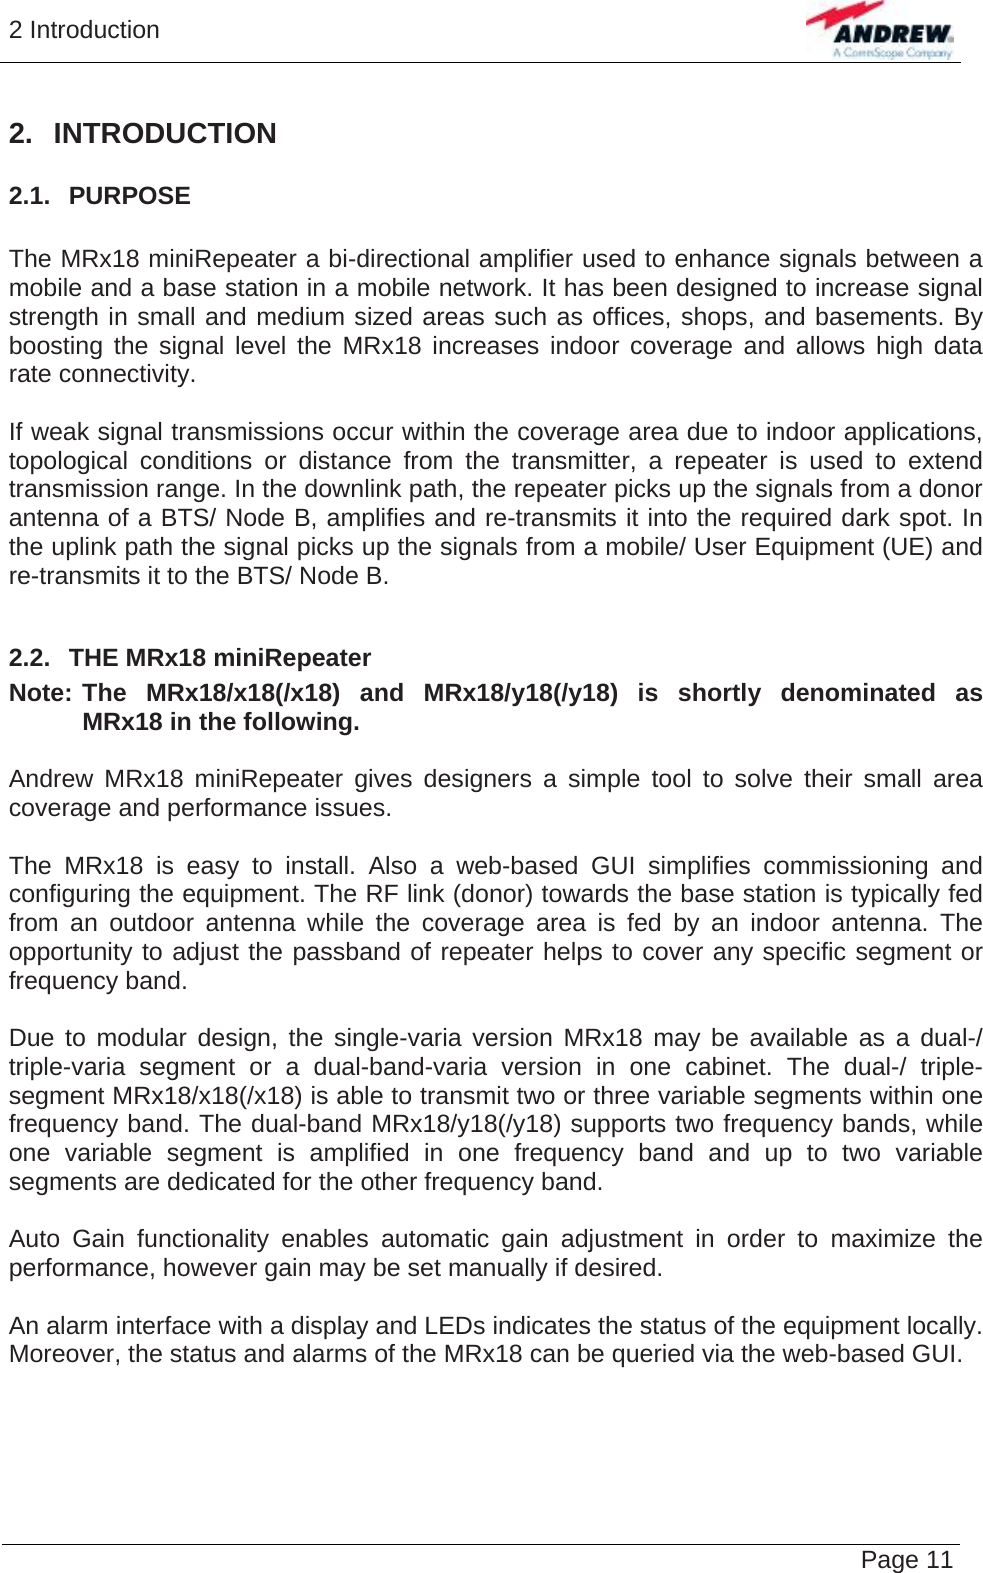 2 Introduction   Page 11 2. INTRODUCTION 2.1.  PURPOSE  The MRx18 miniRepeater a bi-directional amplifier used to enhance signals between a mobile and a base station in a mobile network. It has been designed to increase signal strength in small and medium sized areas such as offices, shops, and basements. By boosting the signal level the MRx18 increases indoor coverage and allows high data rate connectivity.  If weak signal transmissions occur within the coverage area due to indoor applications, topological conditions or distance from the transmitter, a repeater is used to extend transmission range. In the downlink path, the repeater picks up the signals from a donor antenna of a BTS/ Node B, amplifies and re-transmits it into the required dark spot. In the uplink path the signal picks up the signals from a mobile/ User Equipment (UE) and re-transmits it to the BTS/ Node B.  2.2.  THE MRx18 miniRepeater Note:  The MRx18/x18(/x18) and MRx18/y18(/y18) is shortly denominated as MRx18 in the following.  Andrew MRx18 miniRepeater gives designers a simple tool to solve their small area coverage and performance issues.  The MRx18 is easy to install. Also a web-based GUI simplifies commissioning and configuring the equipment. The RF link (donor) towards the base station is typically fed from an outdoor antenna while the coverage area is fed by an indoor antenna. The opportunity to adjust the passband of repeater helps to cover any specific segment or frequency band.  Due to modular design, the single-varia version MRx18 may be available as a dual-/ triple-varia segment or a dual-band-varia version in one cabinet. The dual-/ triple-segment MRx18/x18(/x18) is able to transmit two or three variable segments within one frequency band. The dual-band MRx18/y18(/y18) supports two frequency bands, while one variable segment is amplified in one frequency band and up to two variable segments are dedicated for the other frequency band.  Auto Gain functionality enables automatic gain adjustment in order to maximize the performance, however gain may be set manually if desired.   An alarm interface with a display and LEDs indicates the status of the equipment locally. Moreover, the status and alarms of the MRx18 can be queried via the web-based GUI.  